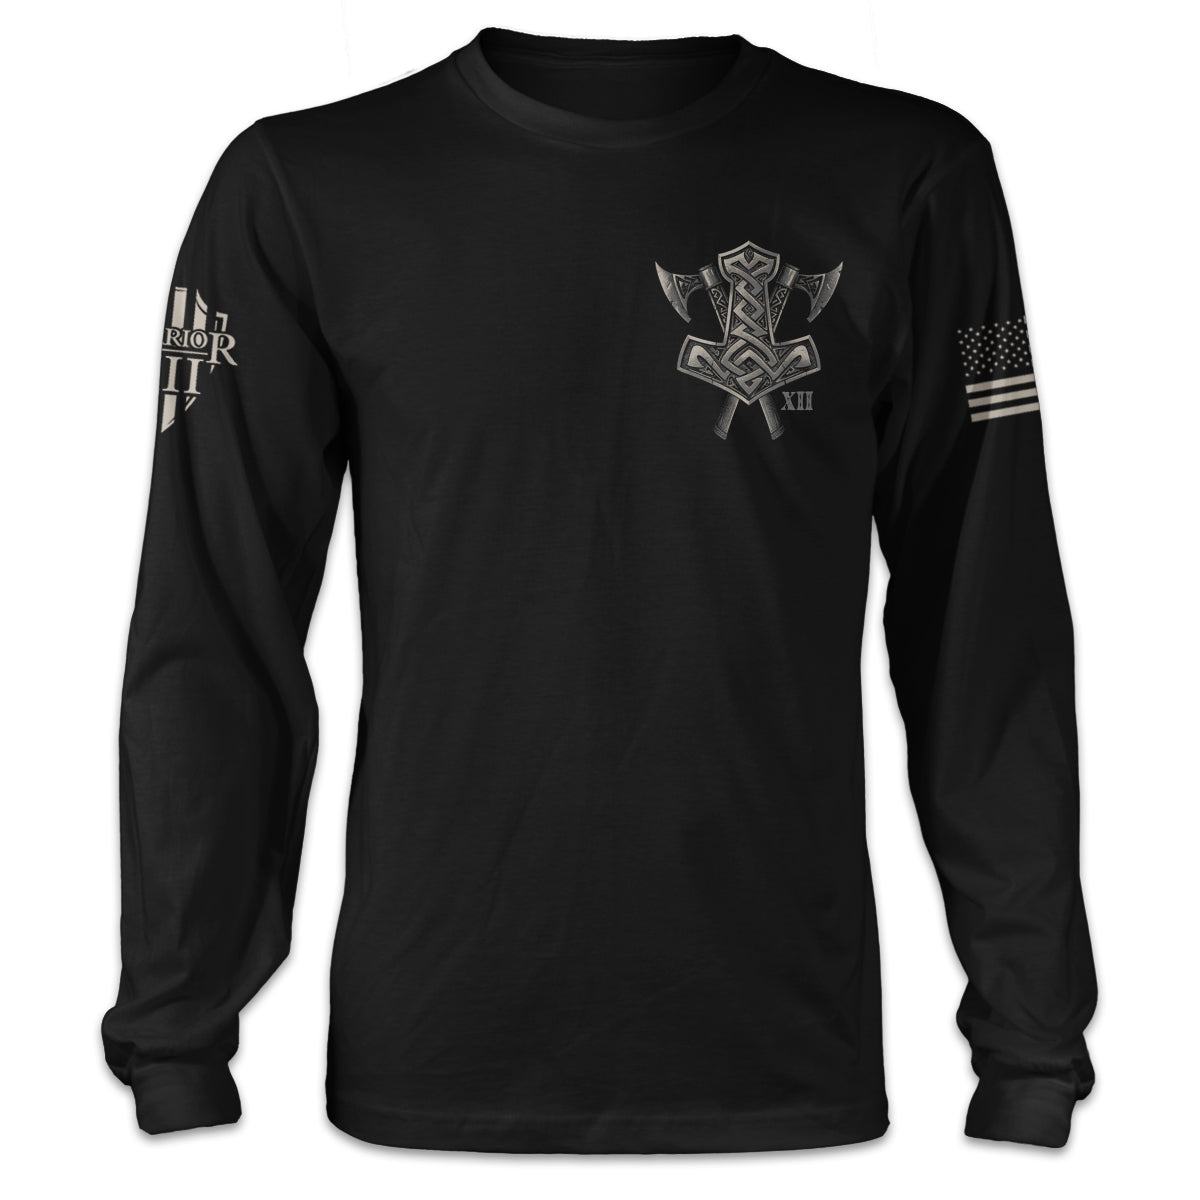 A black long sleeve shirt with Viking weapons printed on the front left chest.